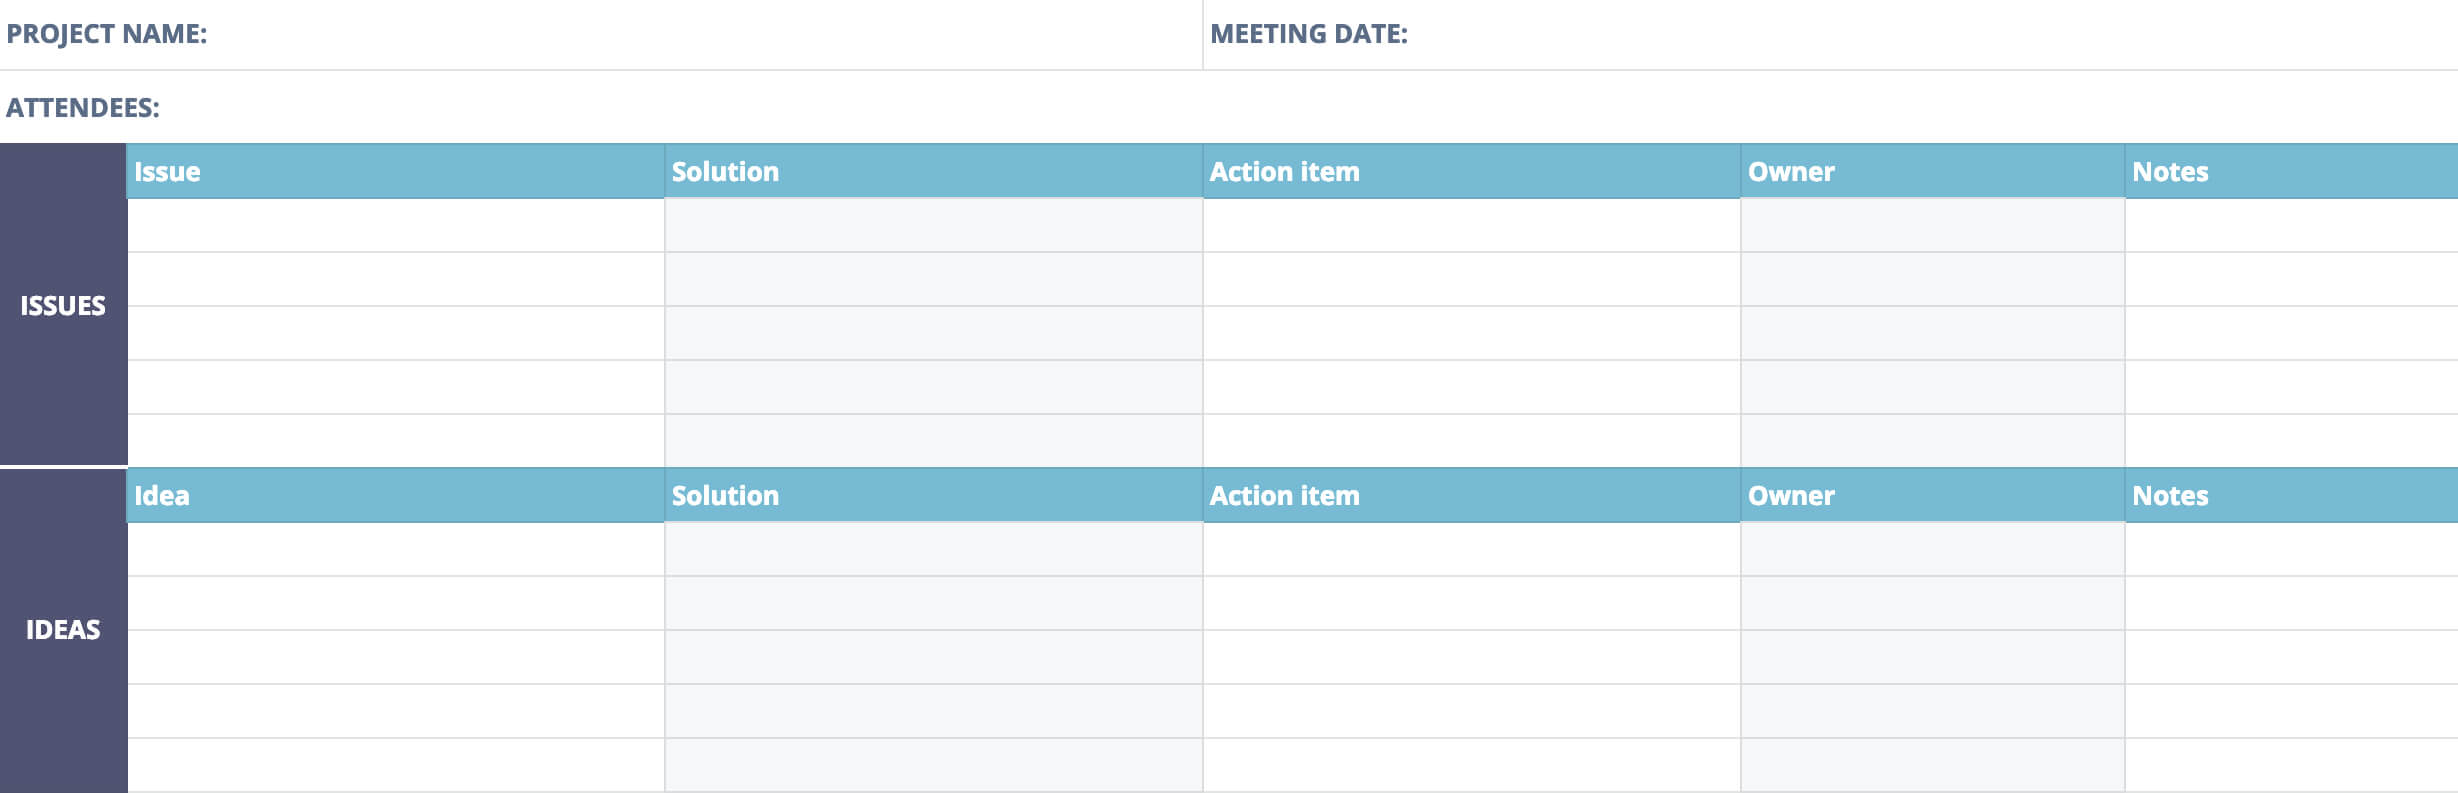 Post Mortem Meeting Template And Tips | Teamgantt For Post Mortem Template Powerpoint